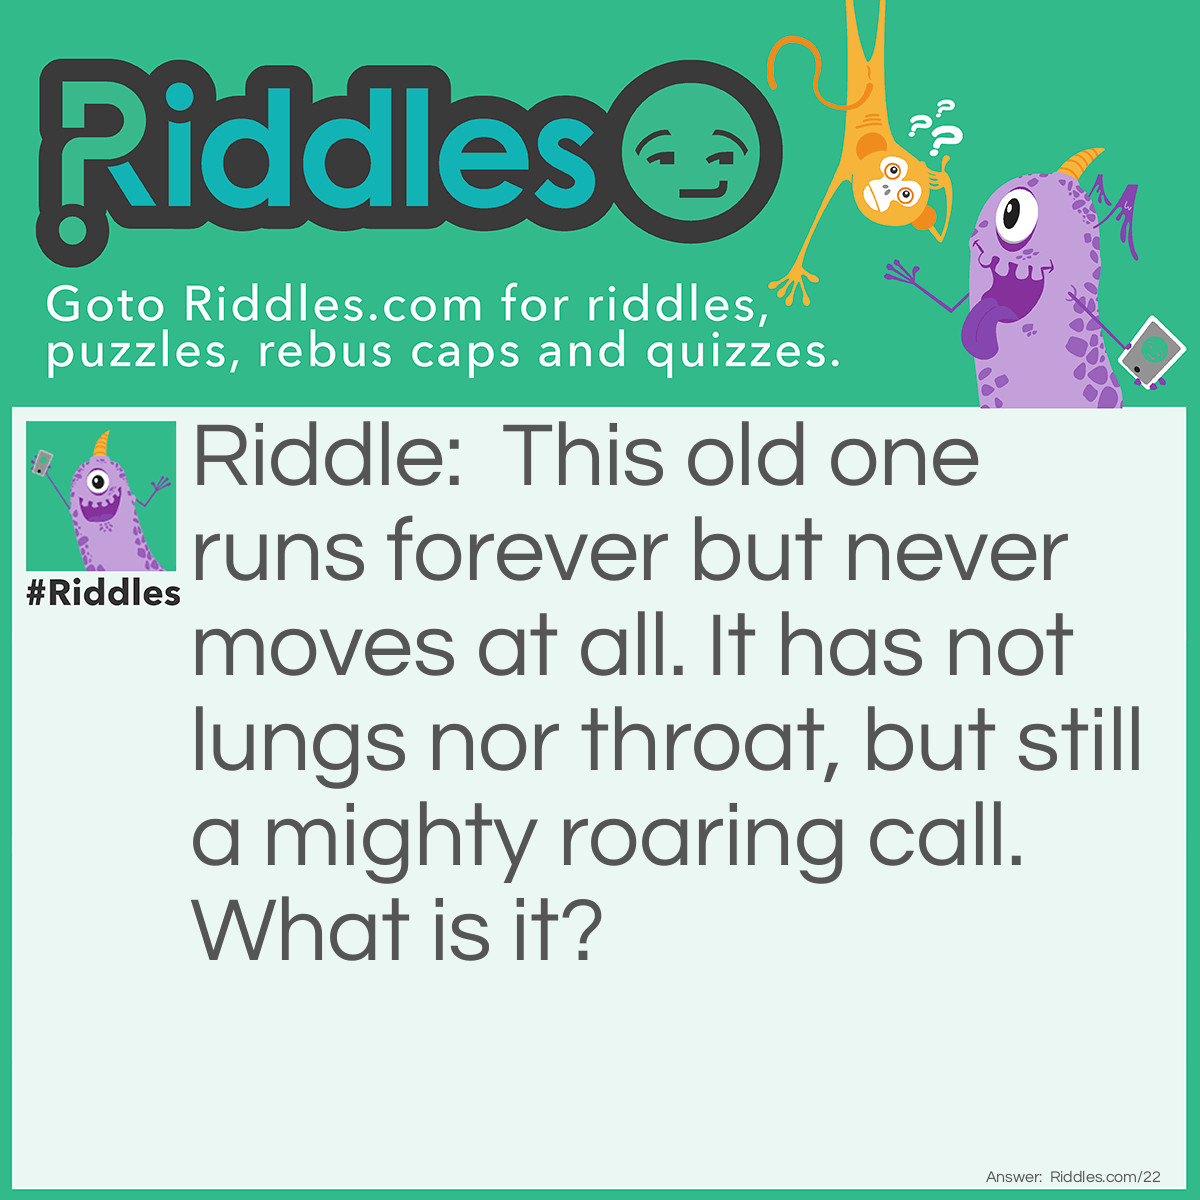 Riddle: This old one runs forever but never moves at all. It has not lungs nor throat, but still a mighty roaring call. What is it? Answer: A Waterfall.